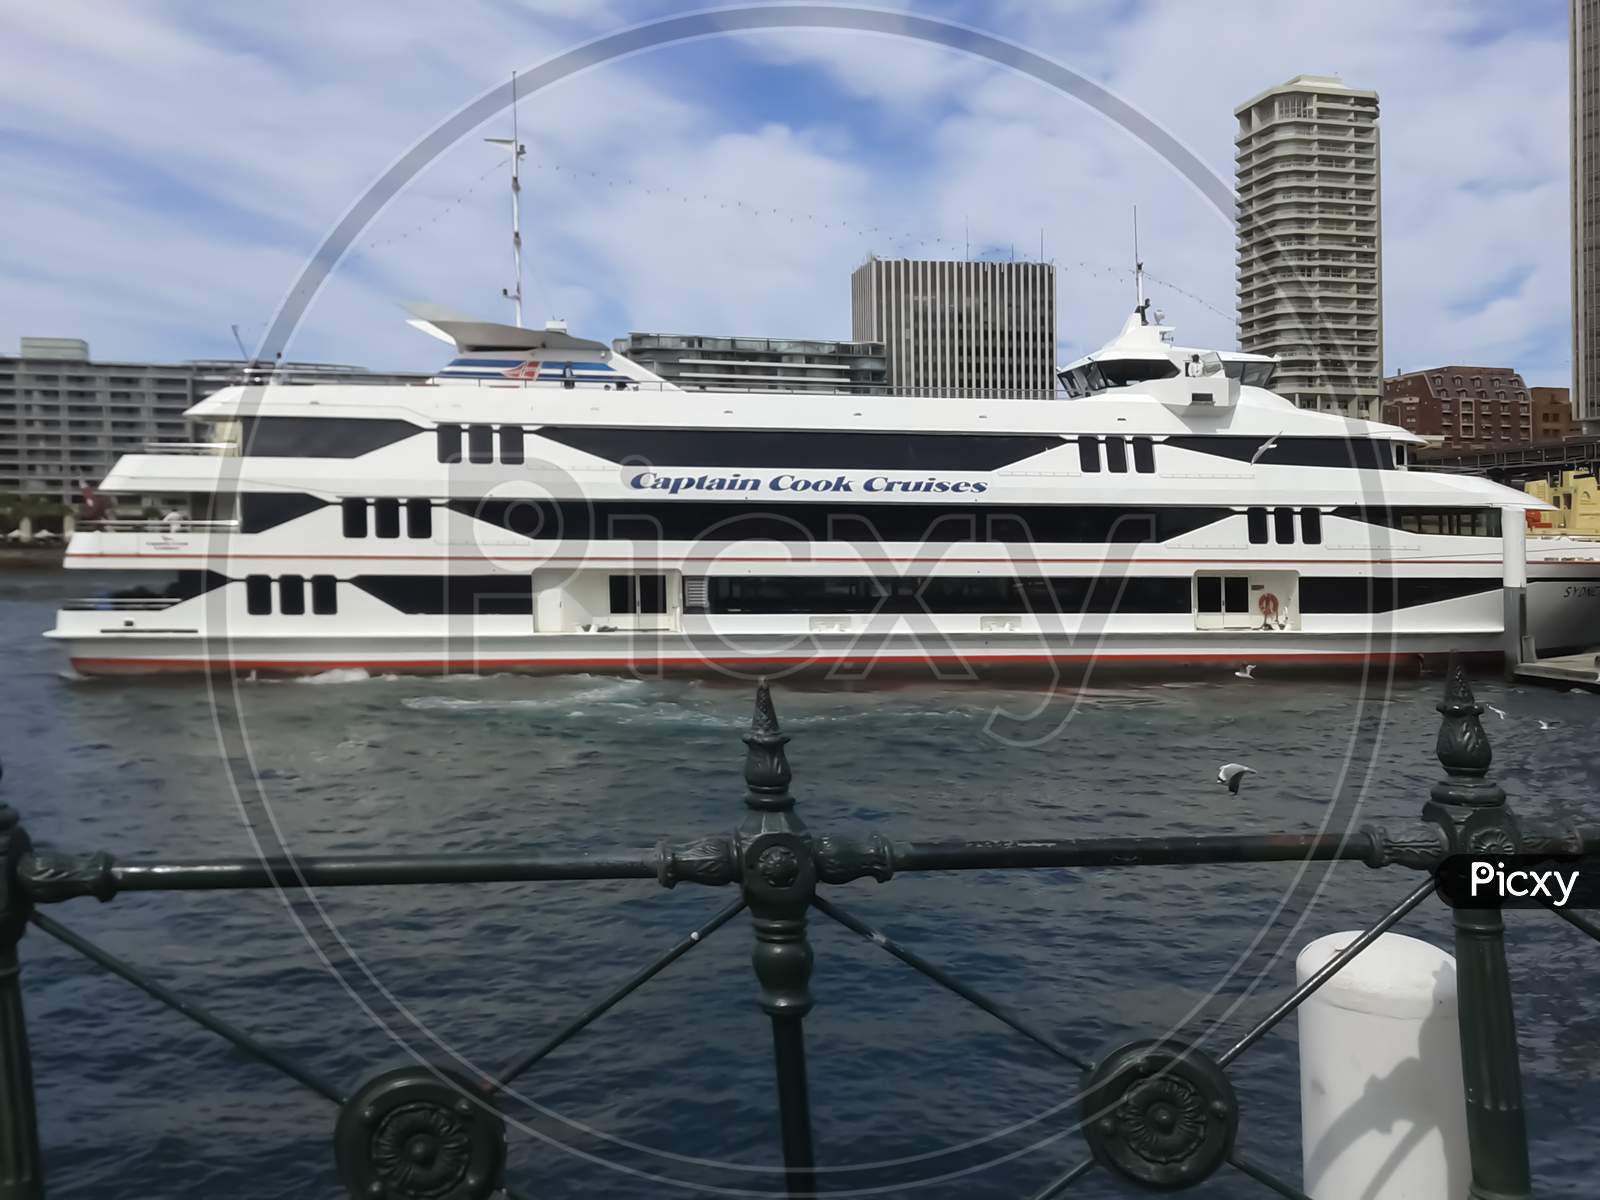 Sydney Nsw, Australia,10/10/2014, Captain Cook Cruise Ship Docked In Port ,View From Sydeny